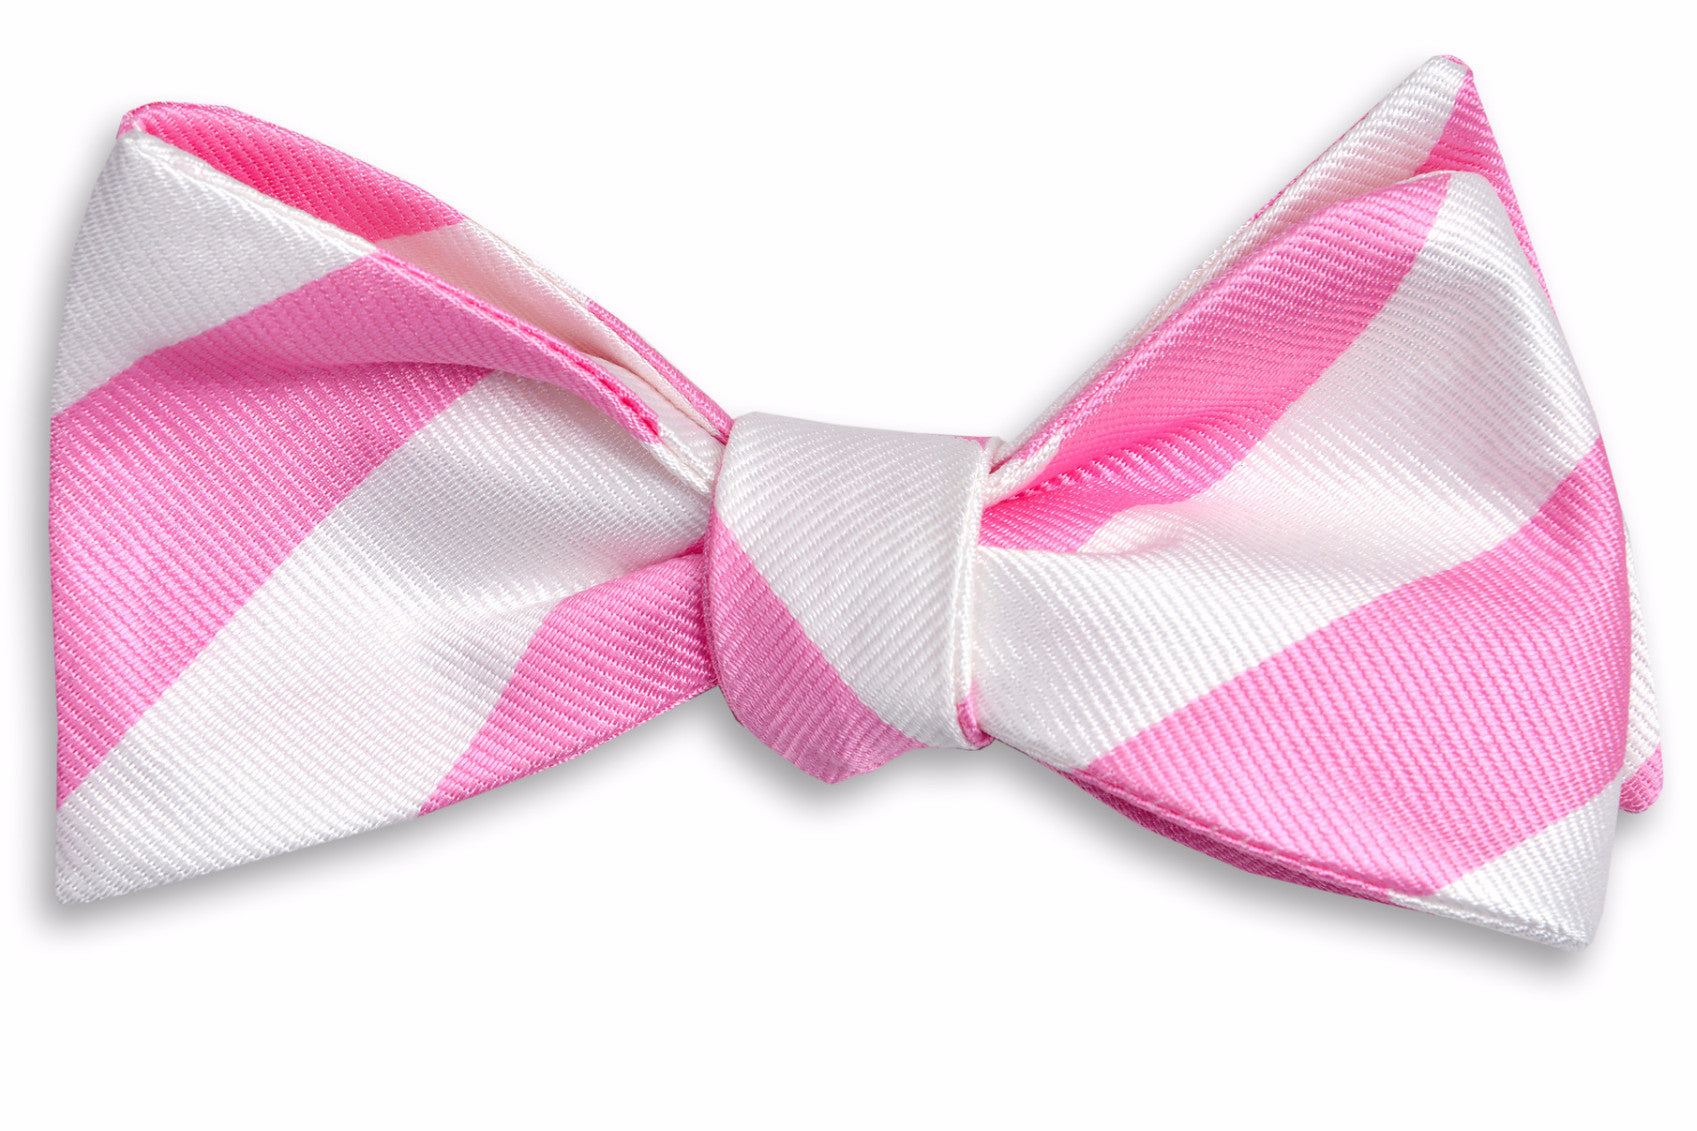 Men's pink bow tie. Made from 100% silk featuring white stripes.